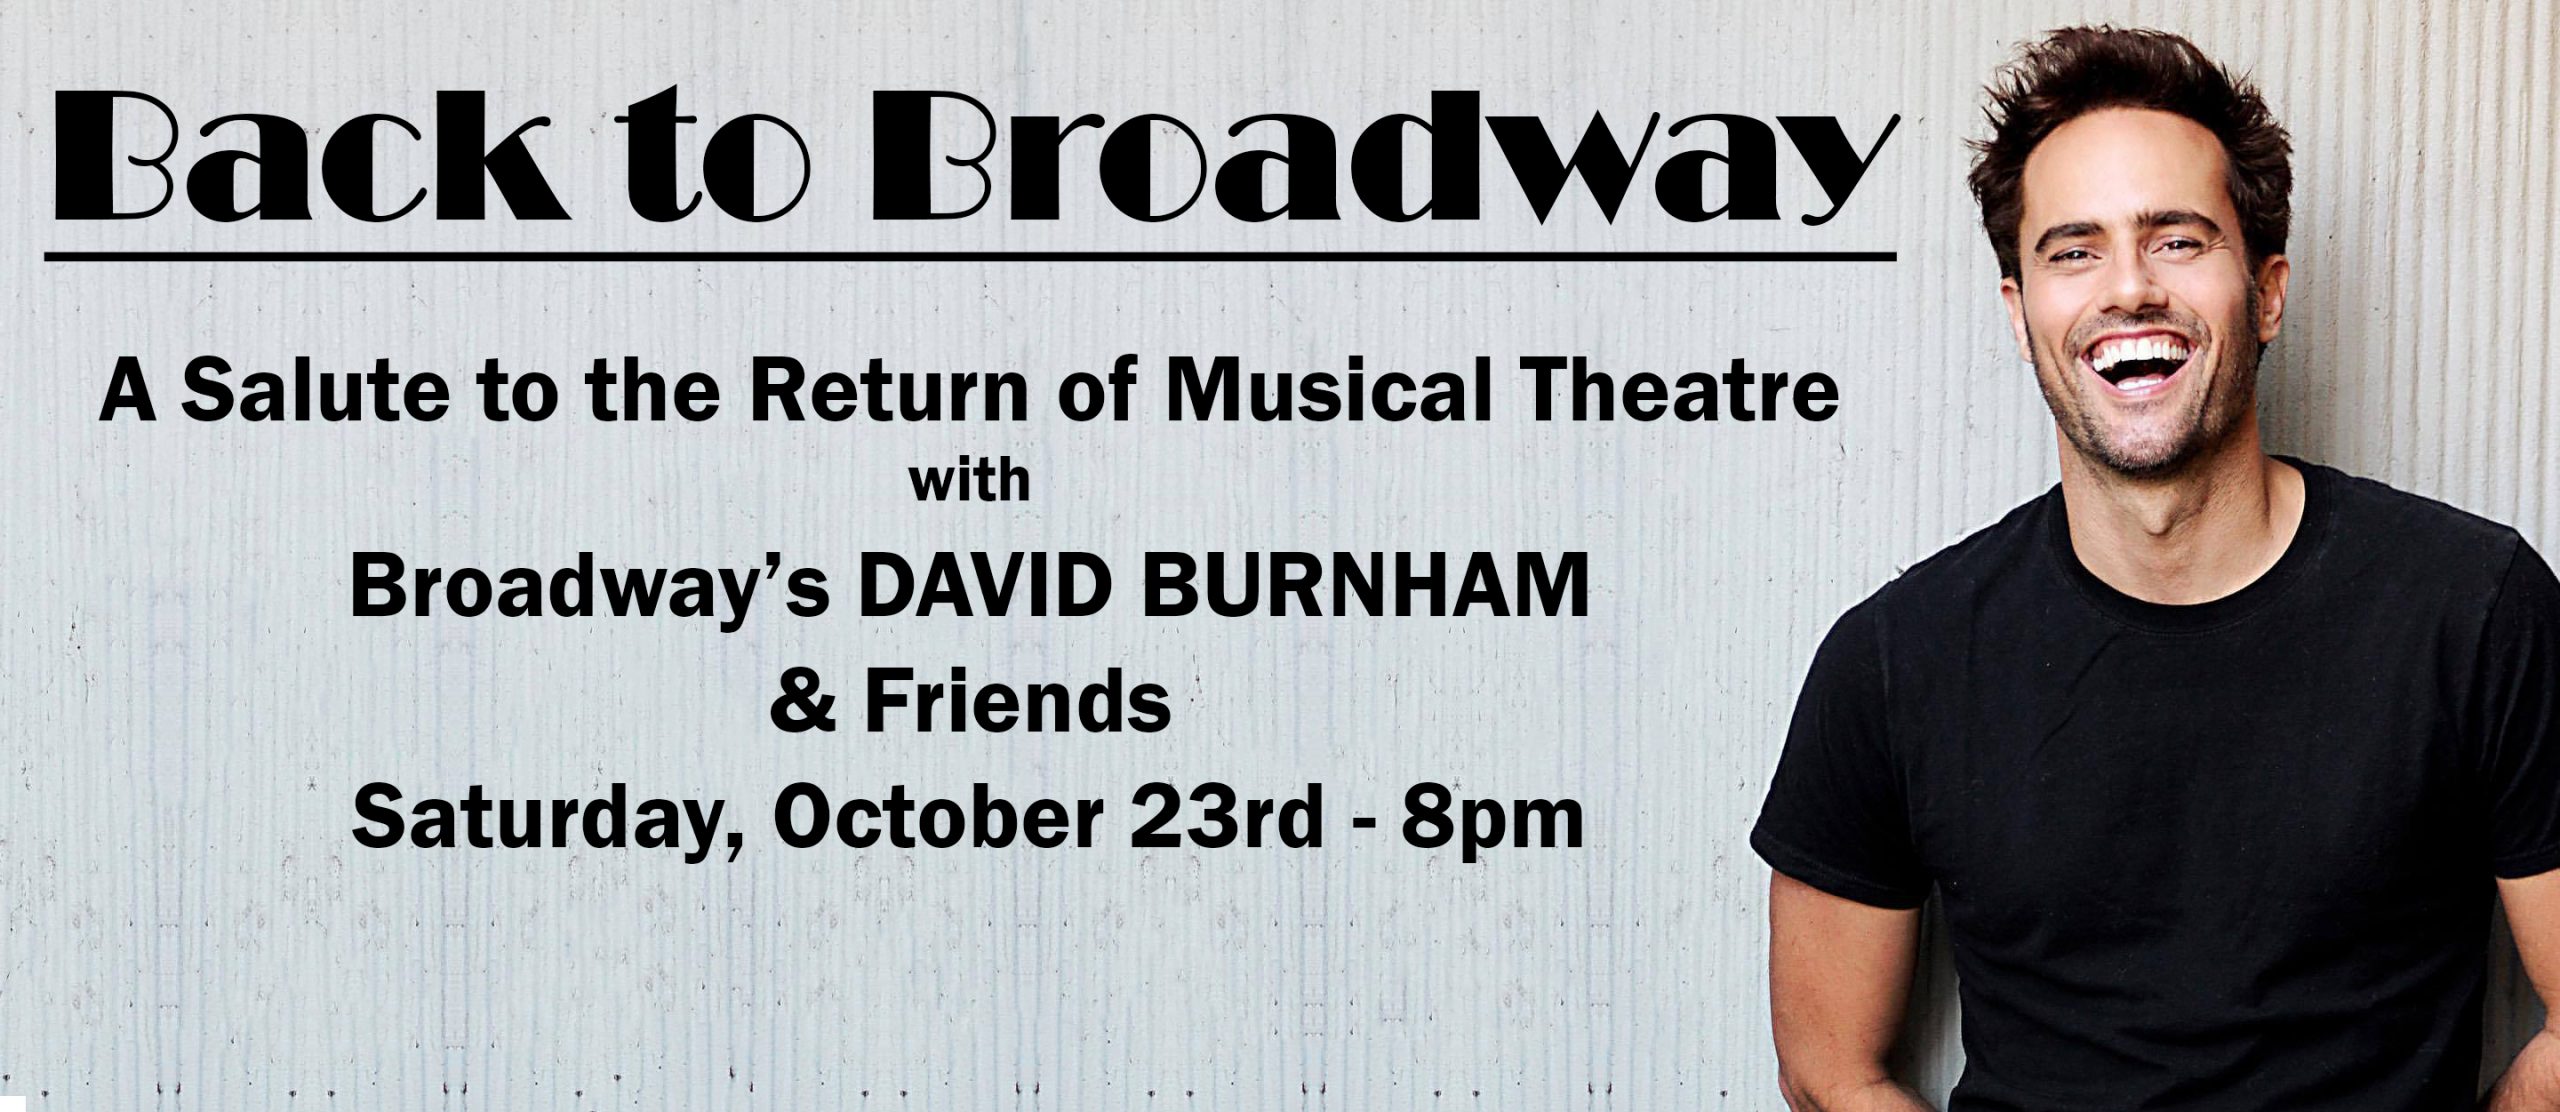 "Back to Broadway" A Salute to the Return of Musical Theatre  With Broadway’s DAVID BURNHAM & Friends